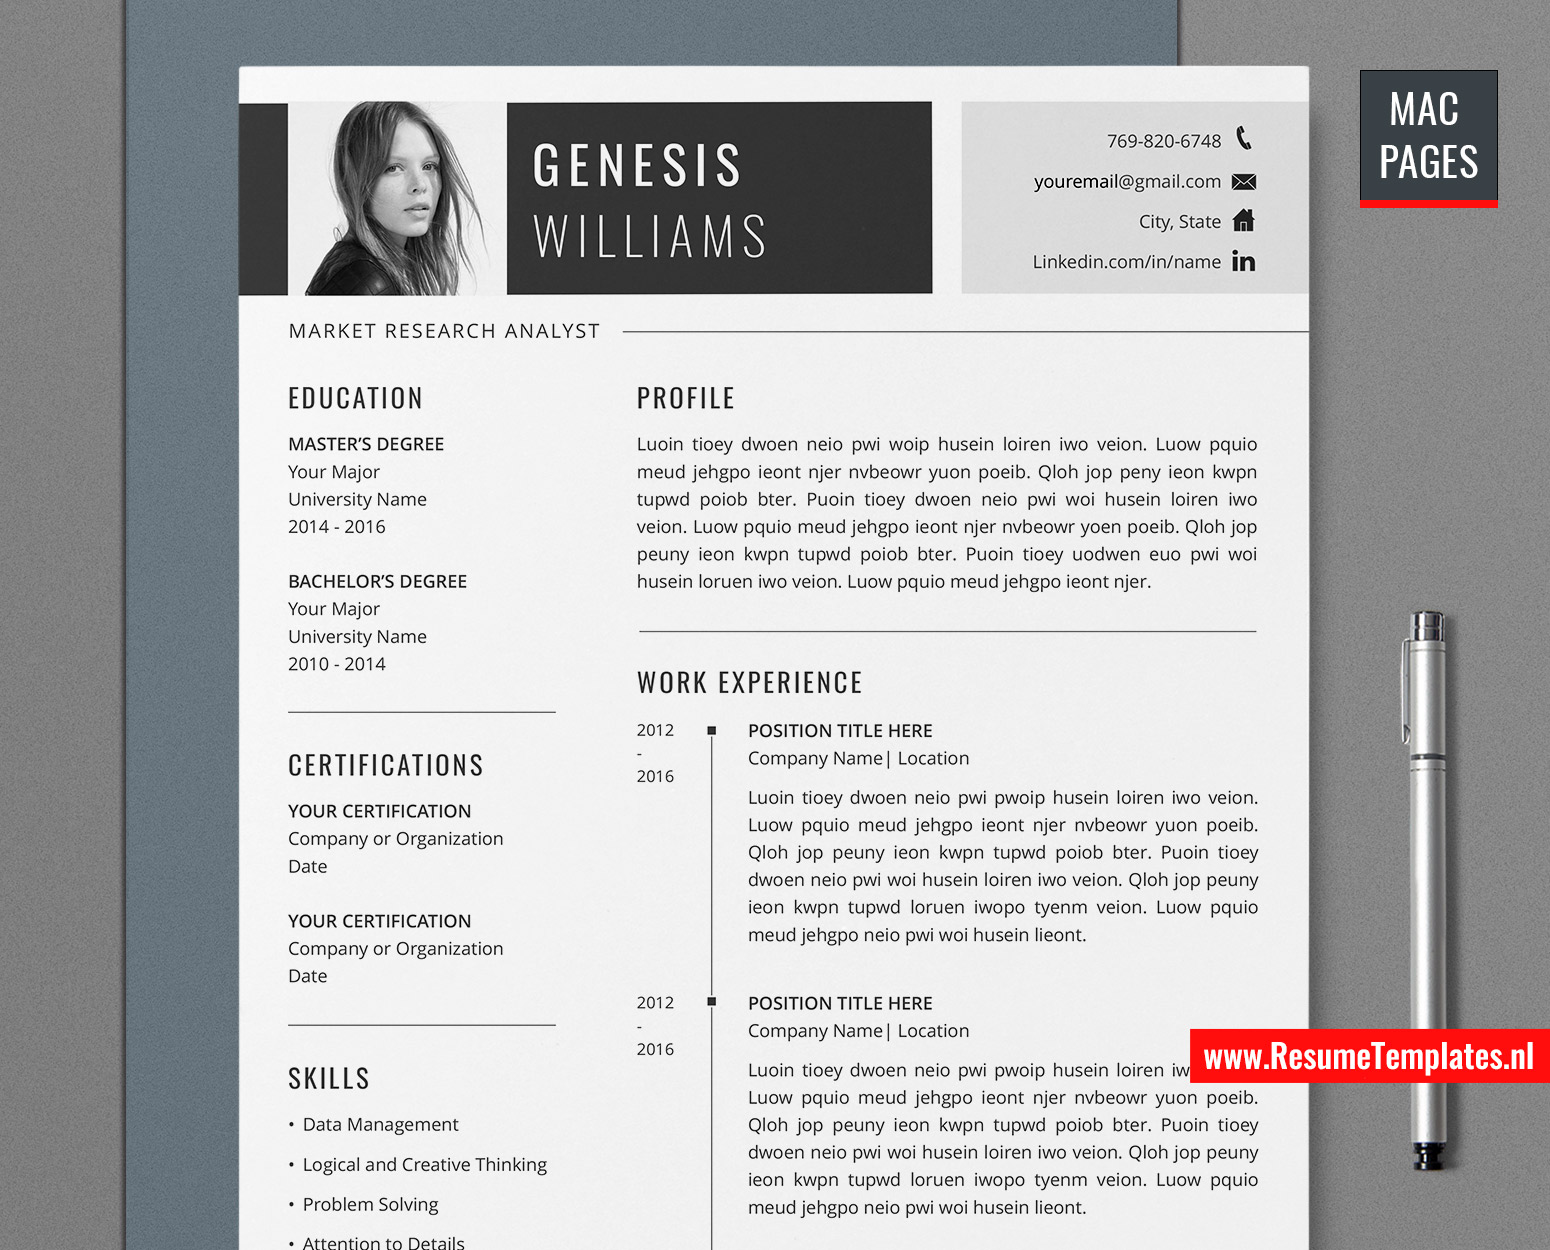 For Mac Pages Professional Resume Template / CV Template for Mac Pages, Cover Letter